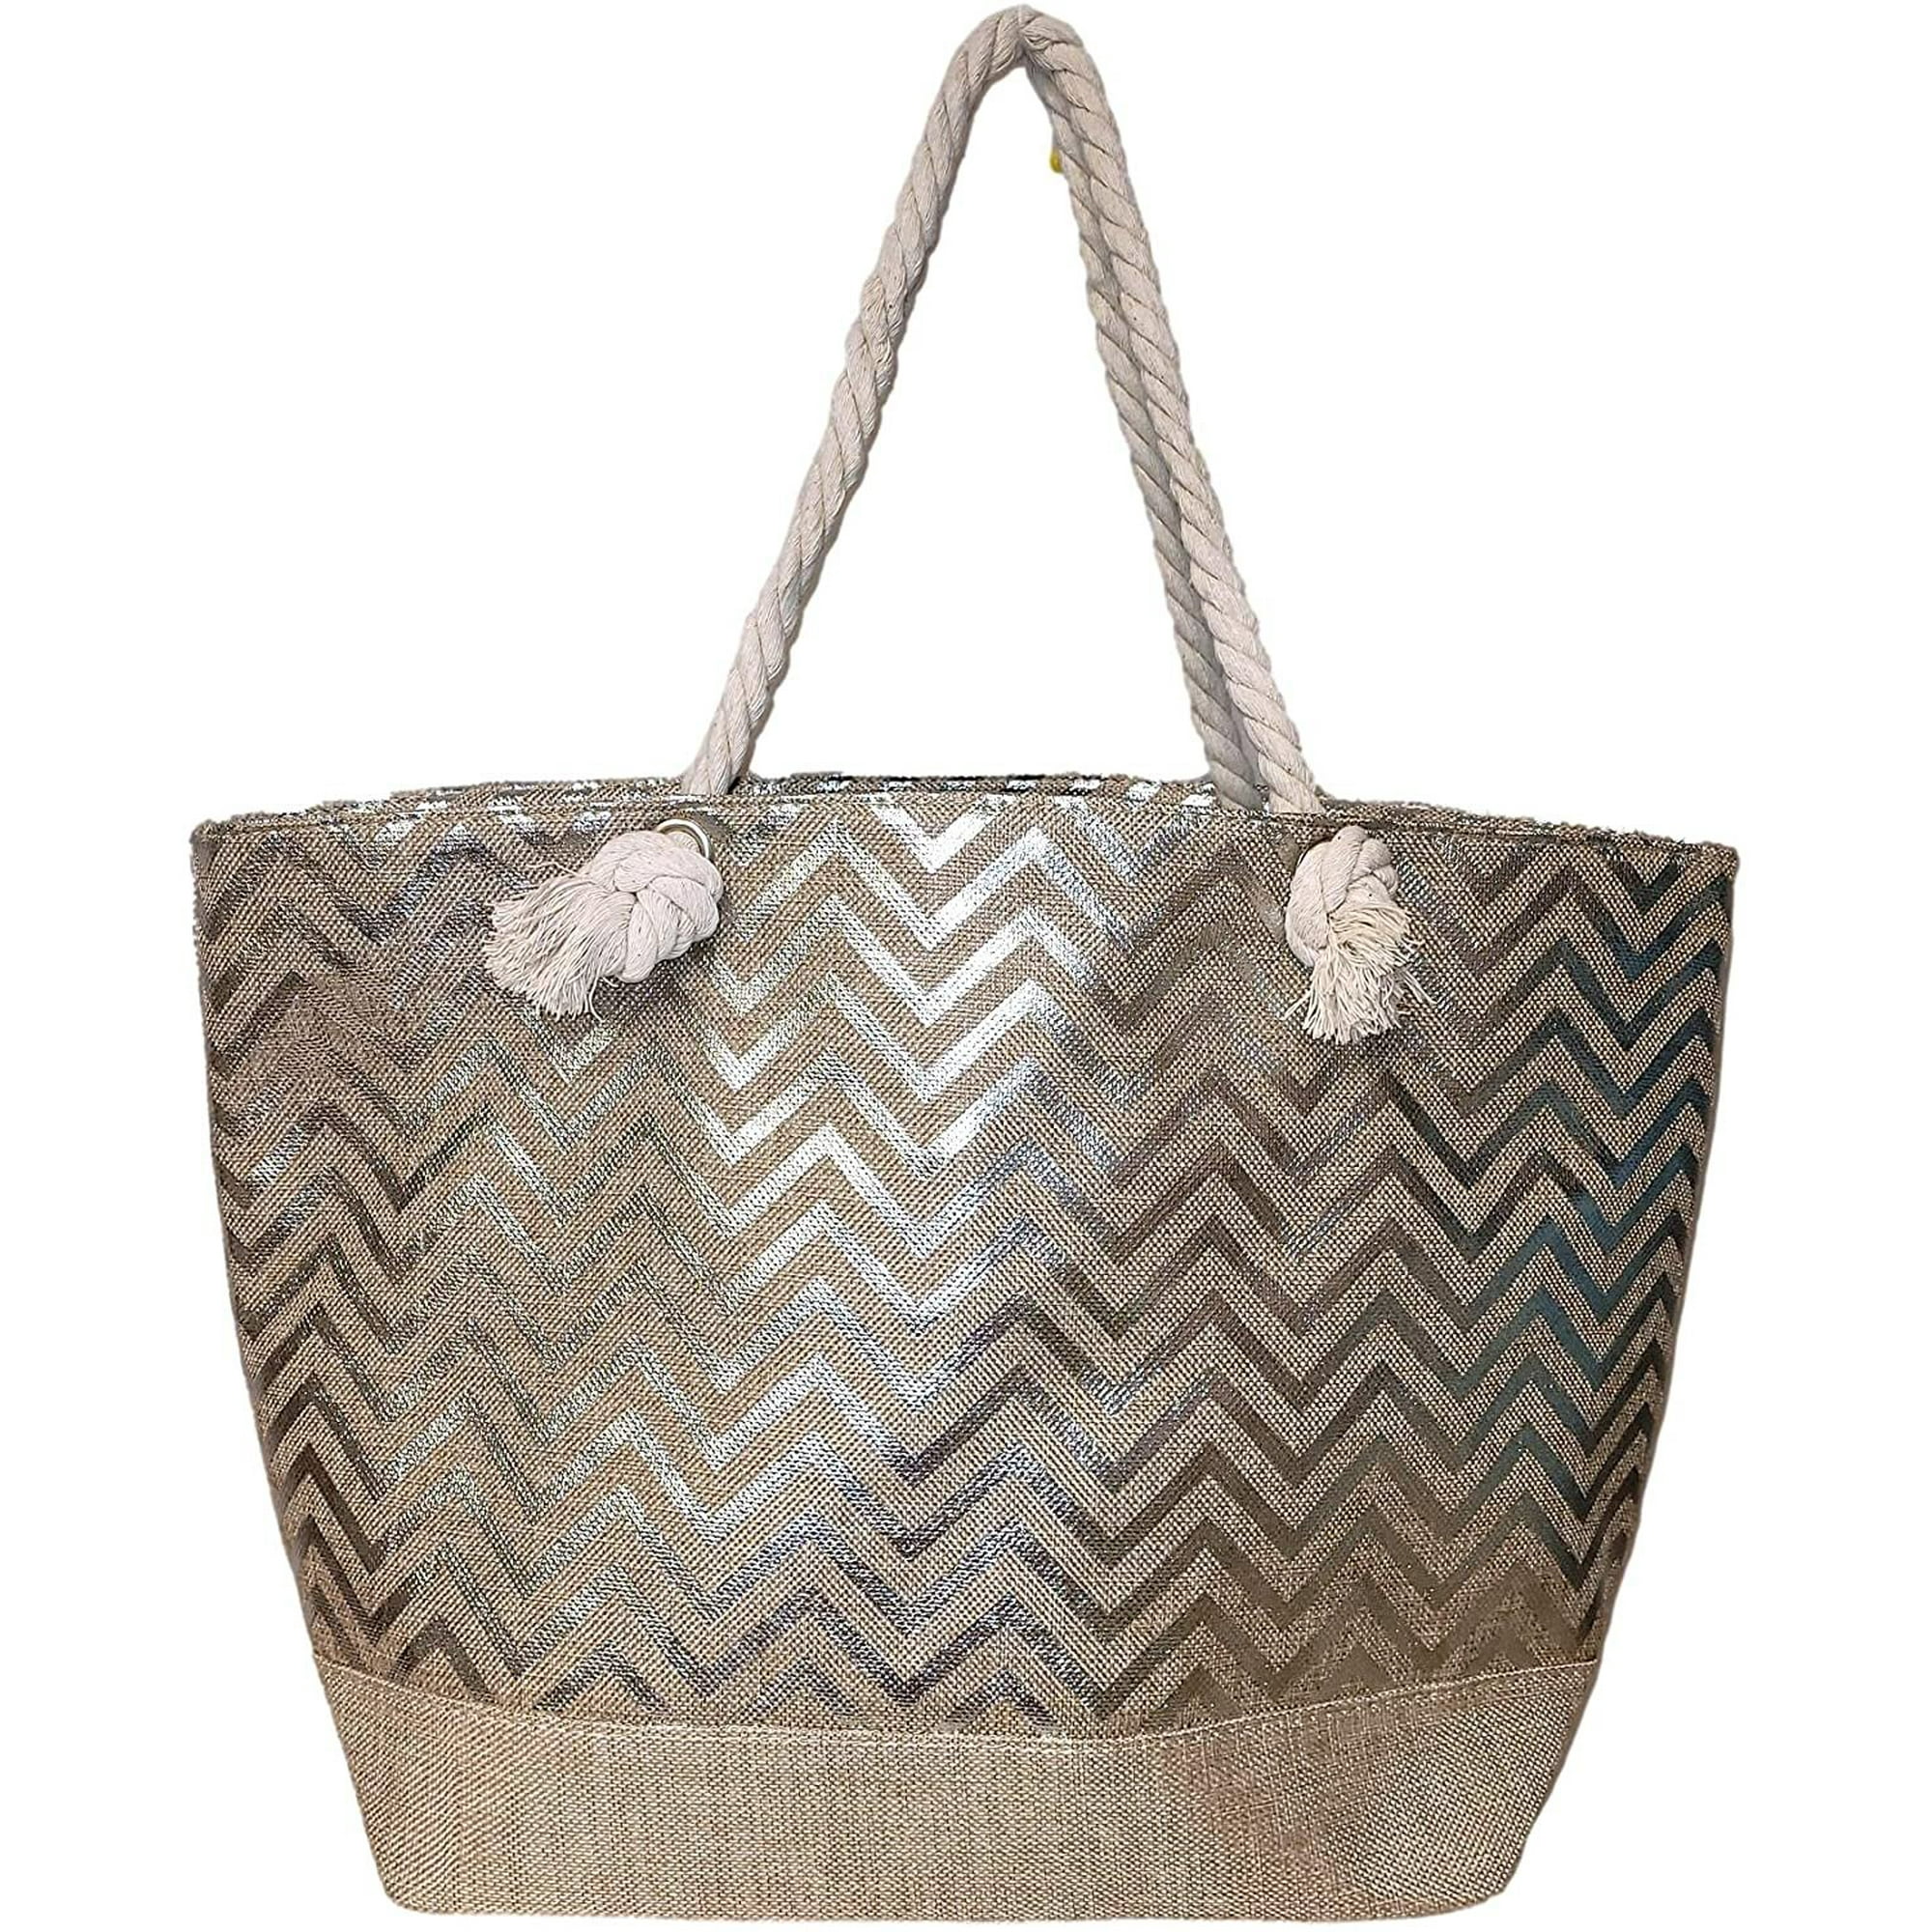 Sona G Designs Large Women Metallic Print Tote Beach Bag with Zipper Top - Can Be Personalized with Initial, Monogram or Name, Women's, Grey